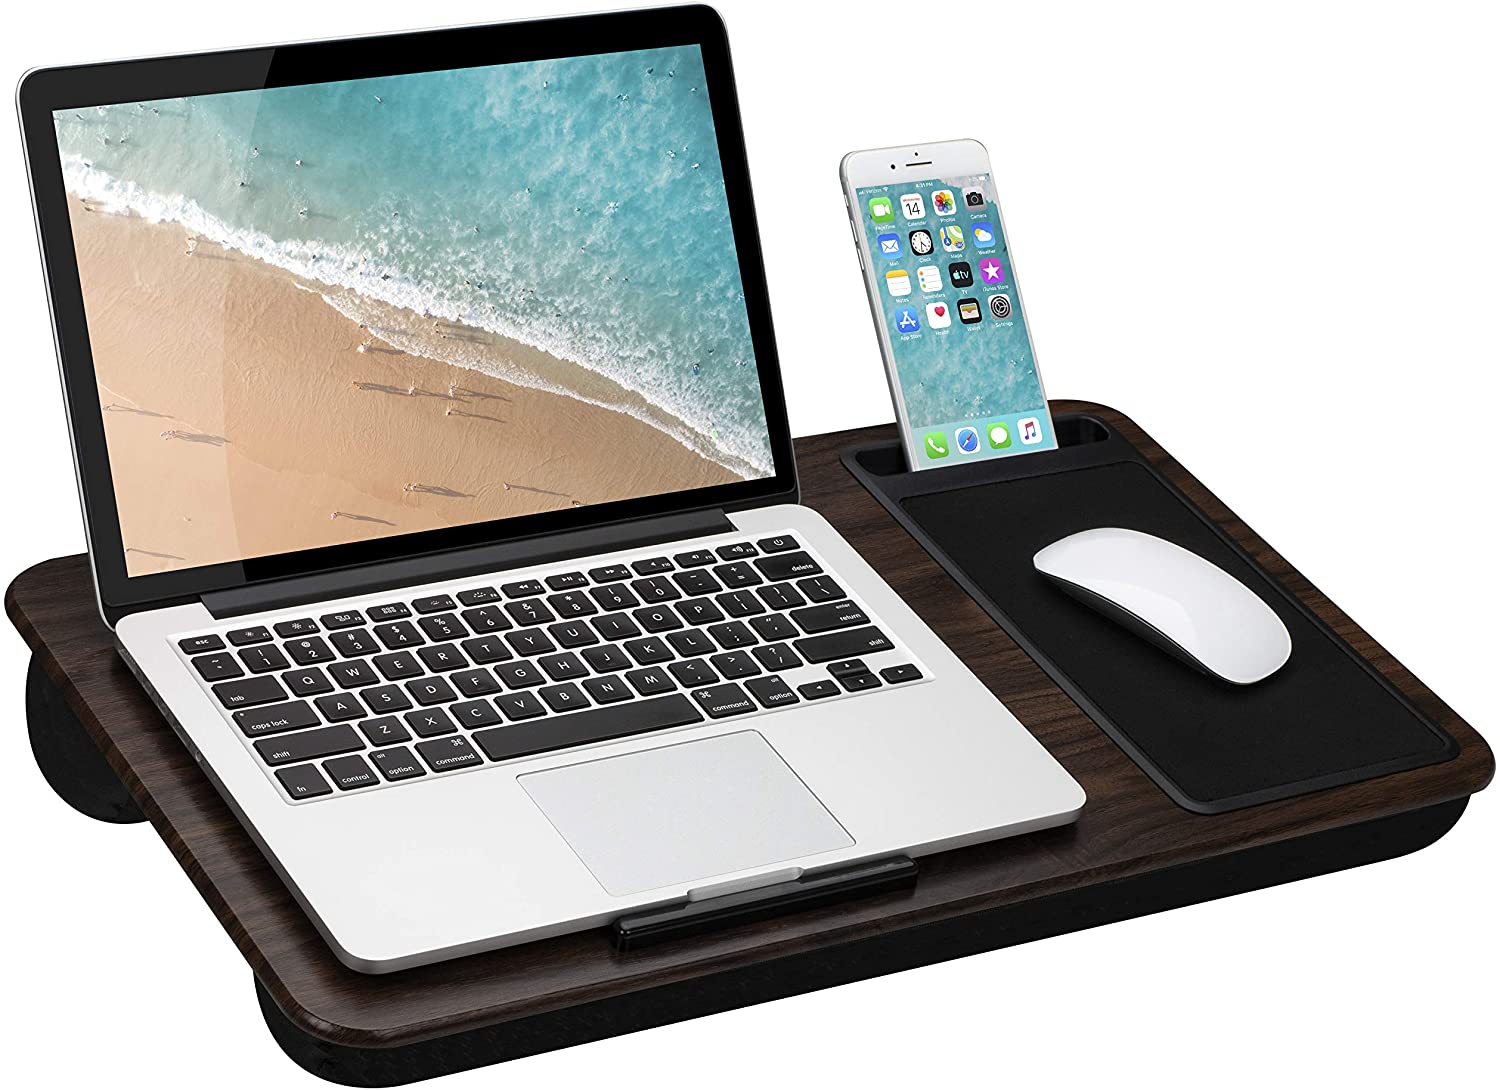 LapGear Home Office Lap Desk with Device Ledge, Mouse Pad, and Phone Holder - Espresso Woodgrain - Fits Up to 15.6 Inch Laptops - Style No. 91575